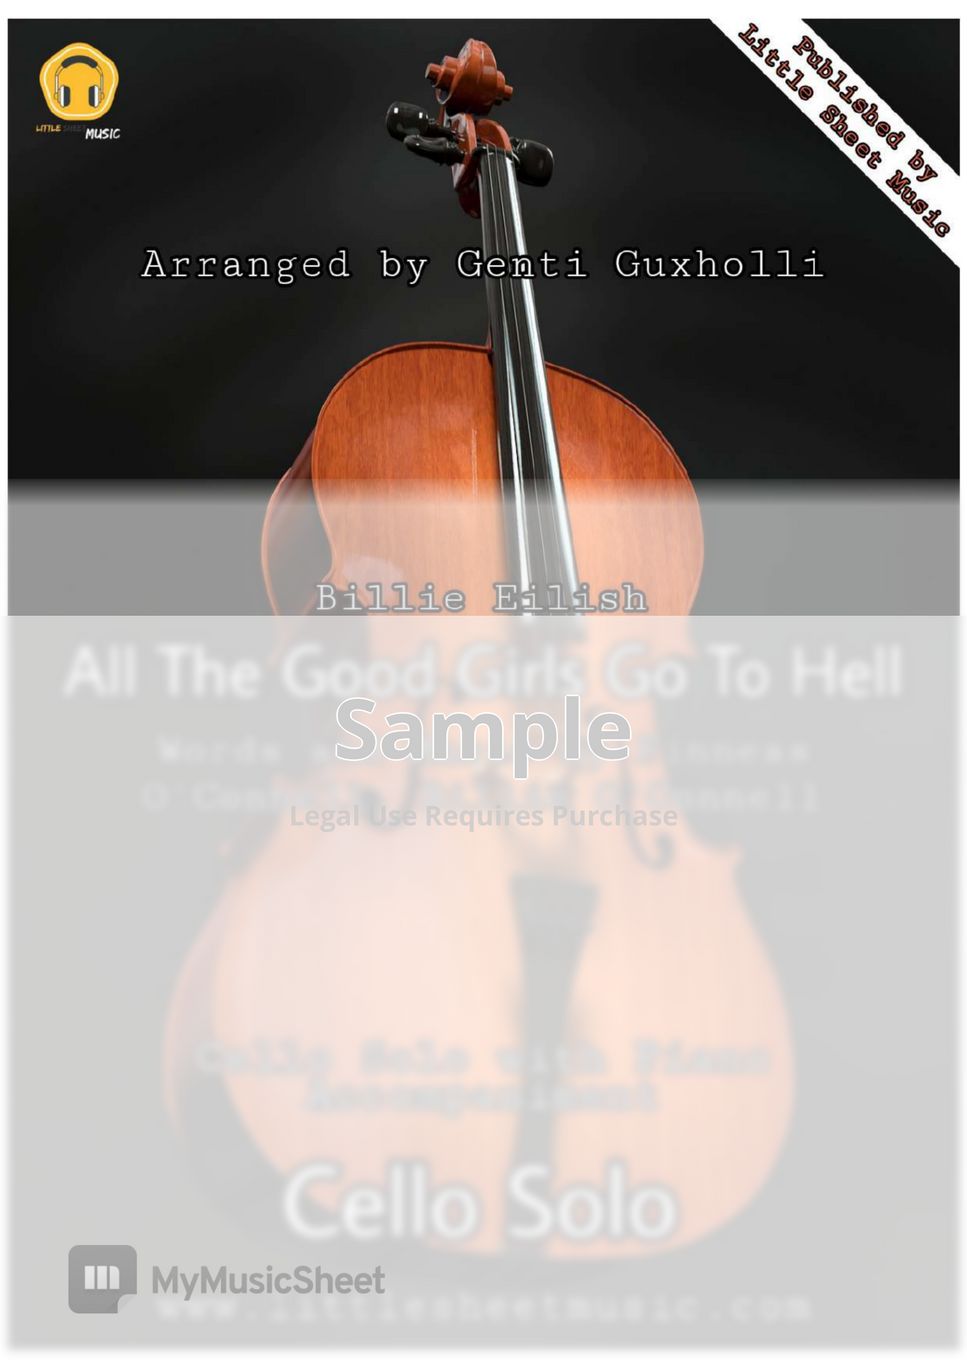 Billie Eilish - All The Good Girls Go To Hell (Cello Solo with Piano Accompaniment) by Genti Guxholli